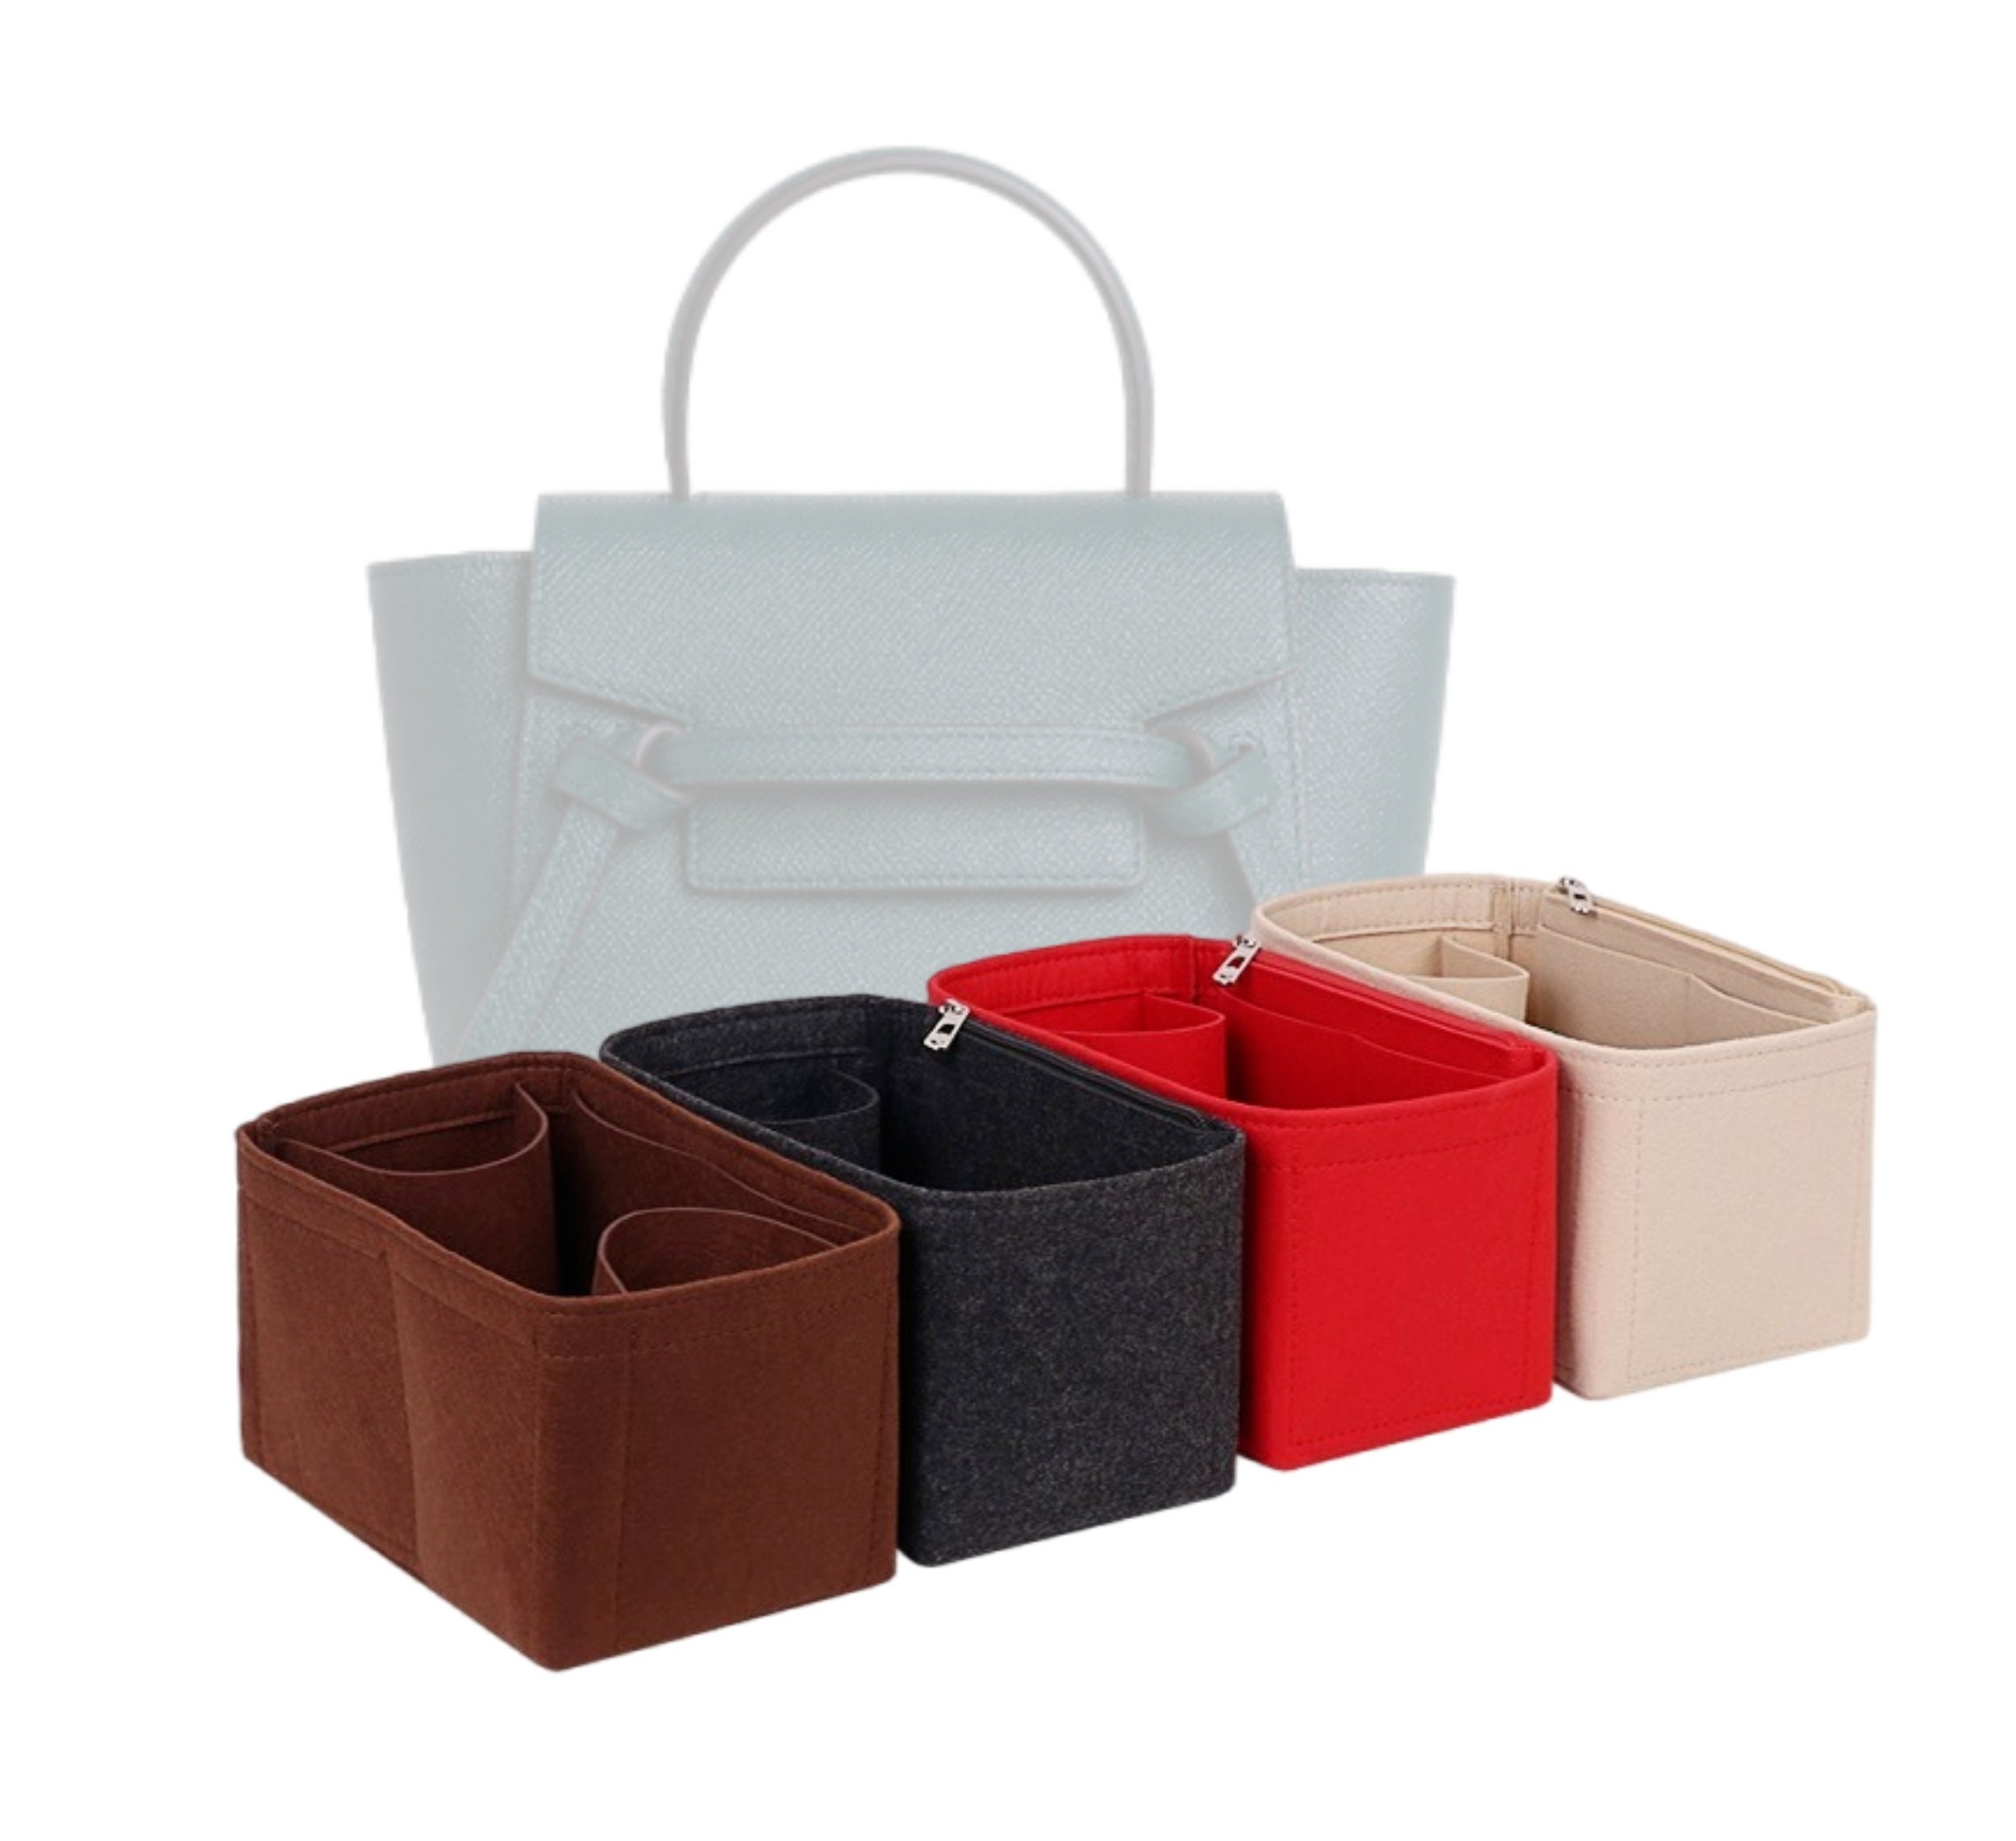 Bag and Purse Organizer with Singular Style for Celine Mini Luggage Bag